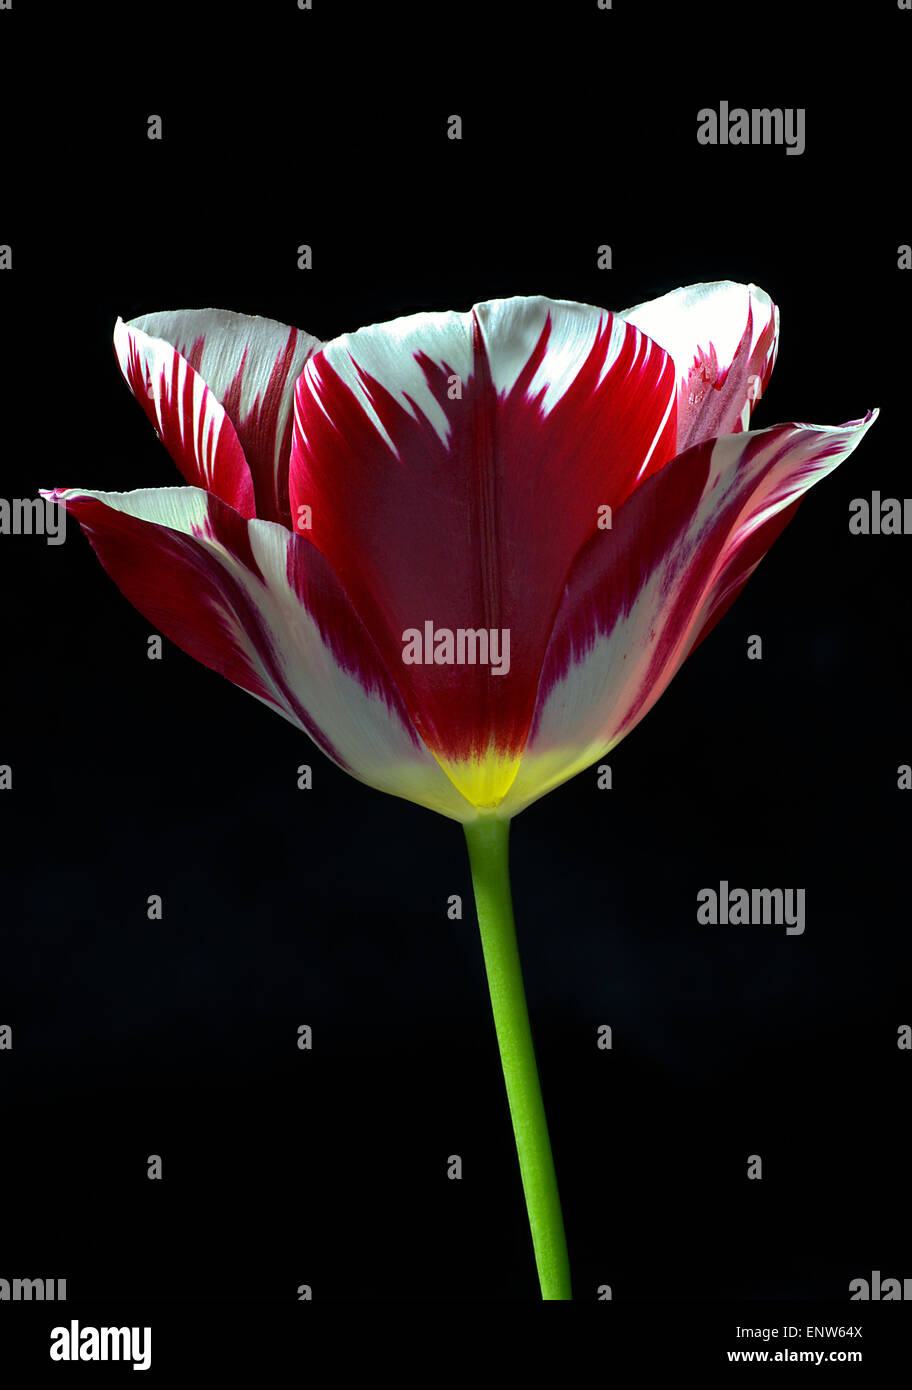 Focus stacked close up of a red and white striped tulip flower Stock Photo